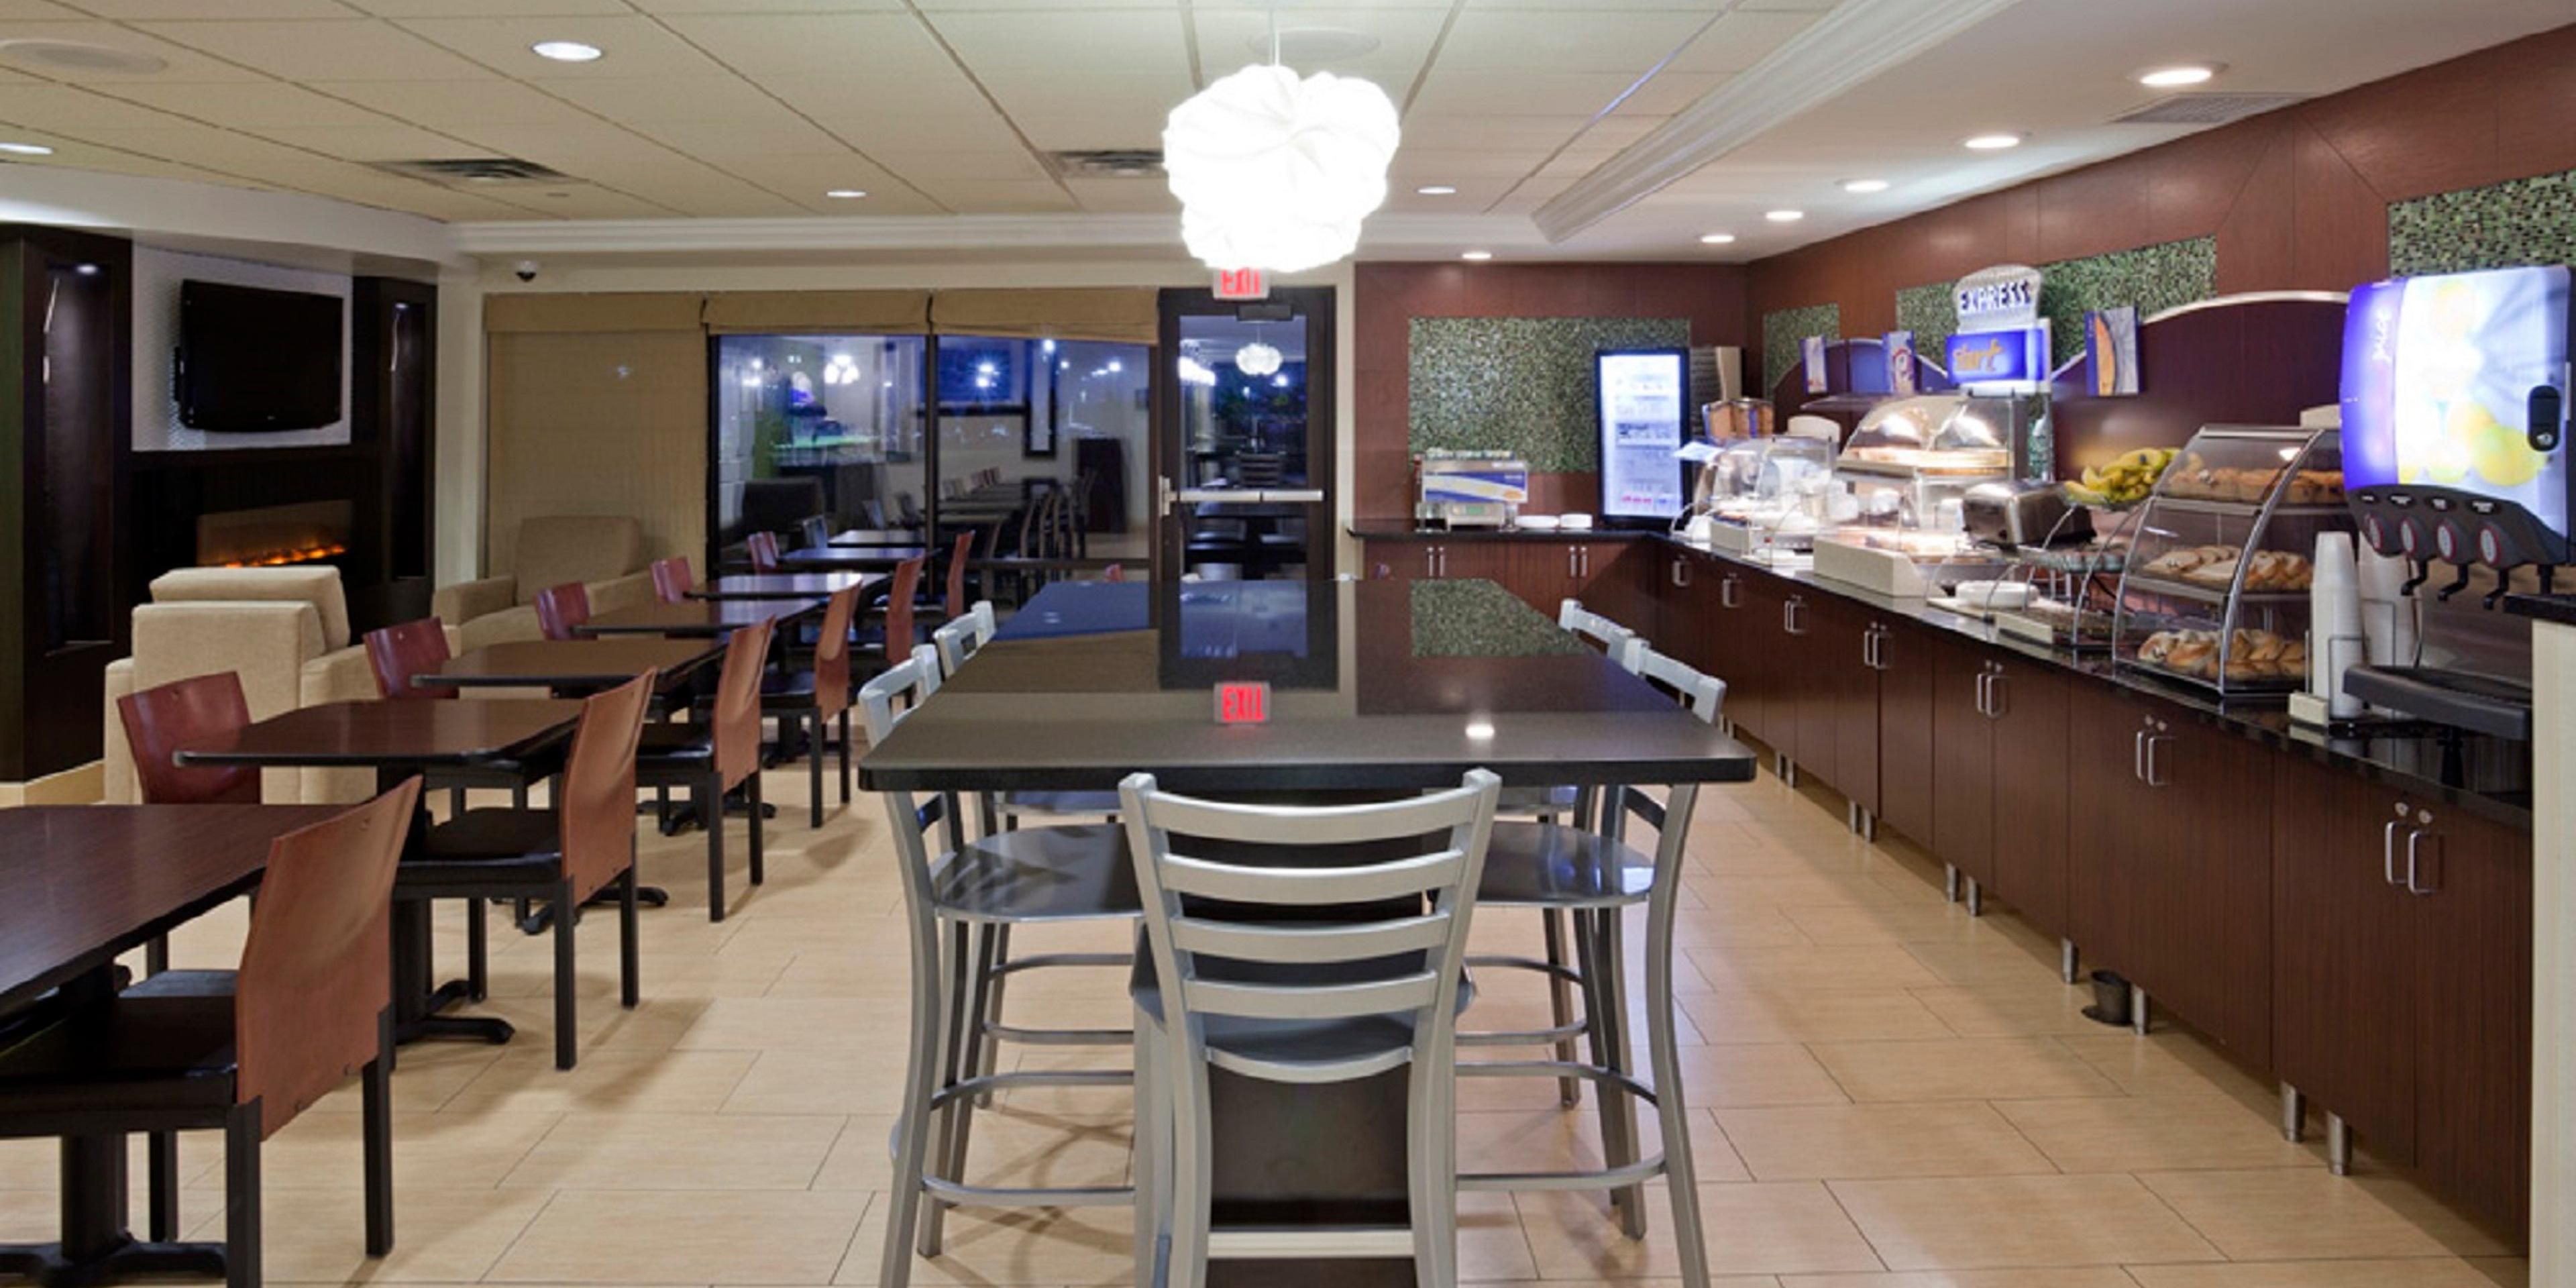 At the Holiday Inn Express and Suites Rogers we have a complimentary, hot breakfast waiting for you every morning. There's a whole buffet full of offerings sure to please everyone. Our Express Start Breakfast is the perfect way to begin your day.